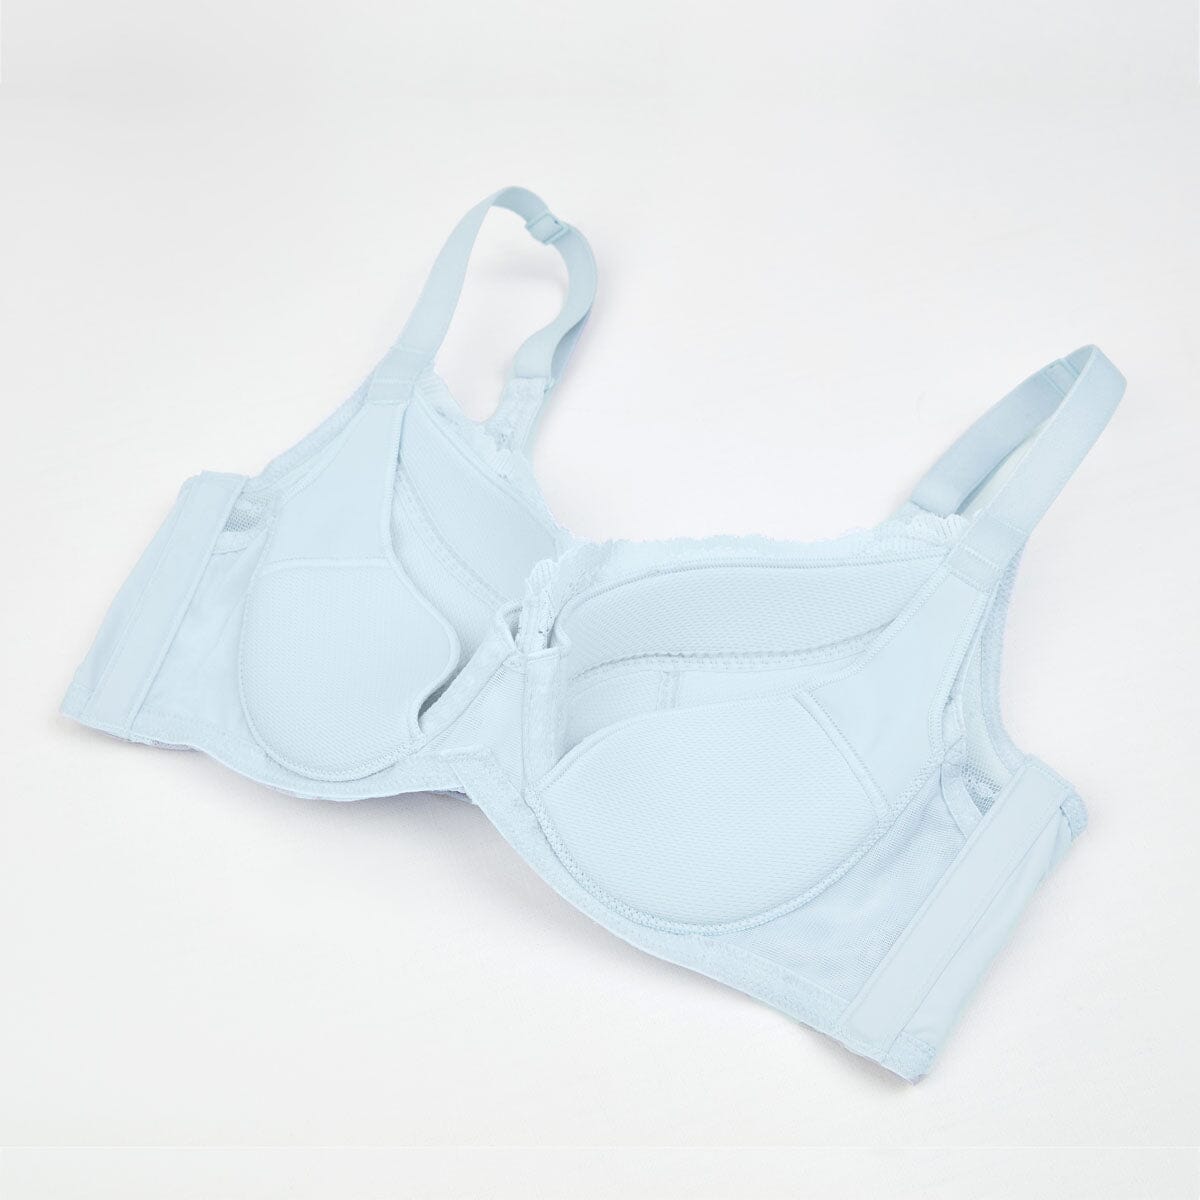 Sustainable REherbafoam??? Slim-cut & Cushioned Sling Push Up Lace Bra Bra Her Own Words 